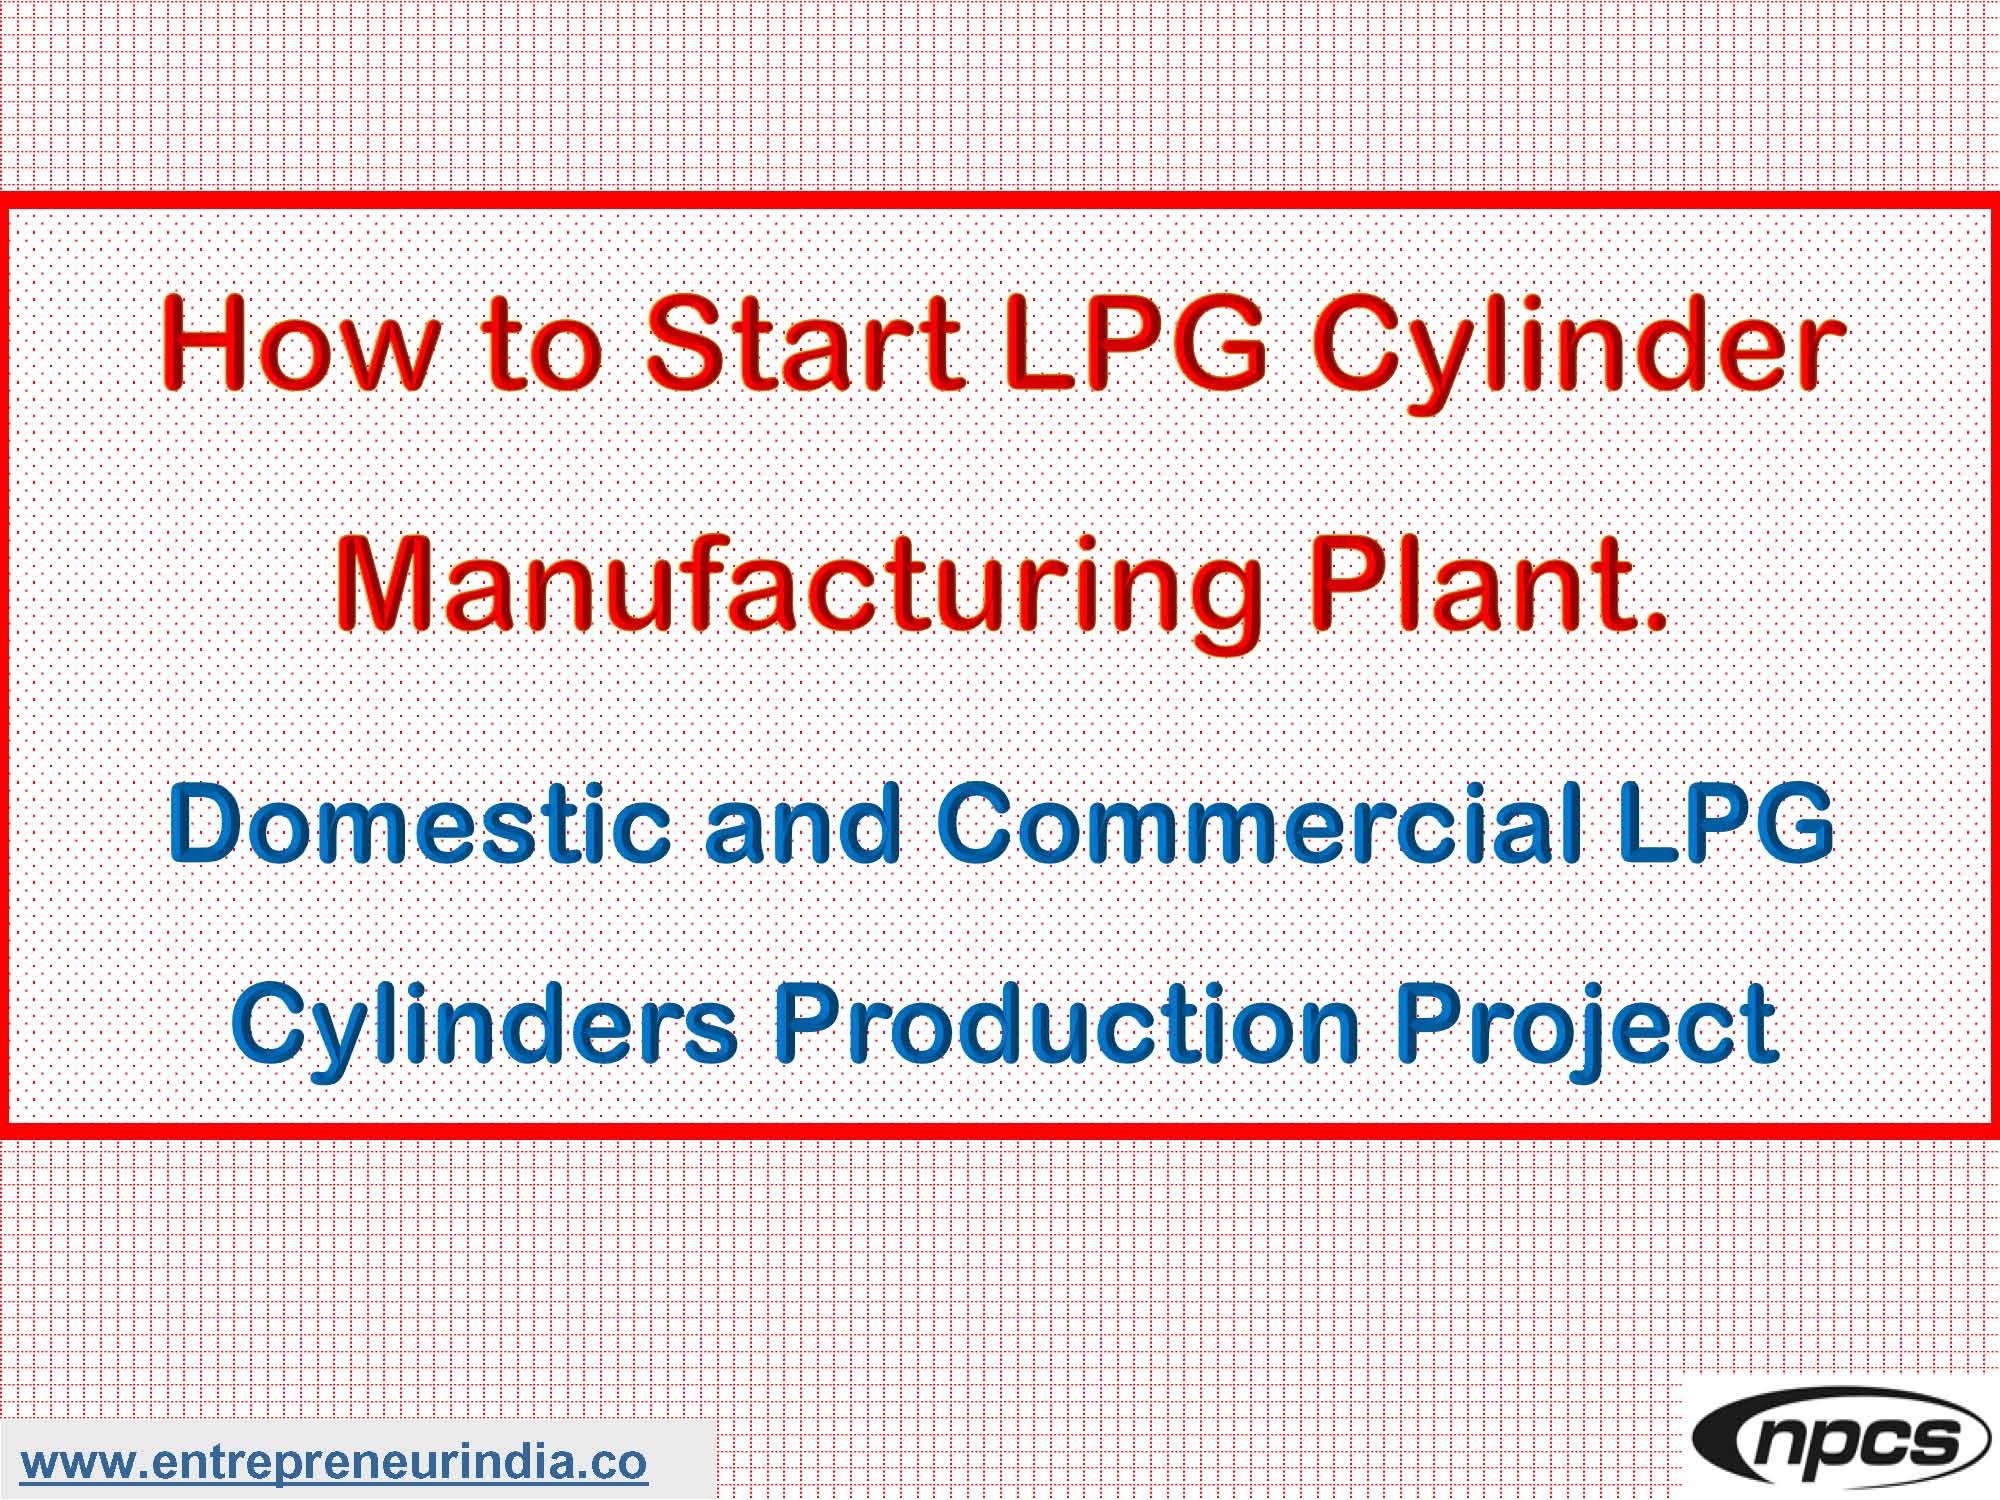 How to Start LPG Cylinder Manufacturing Plant